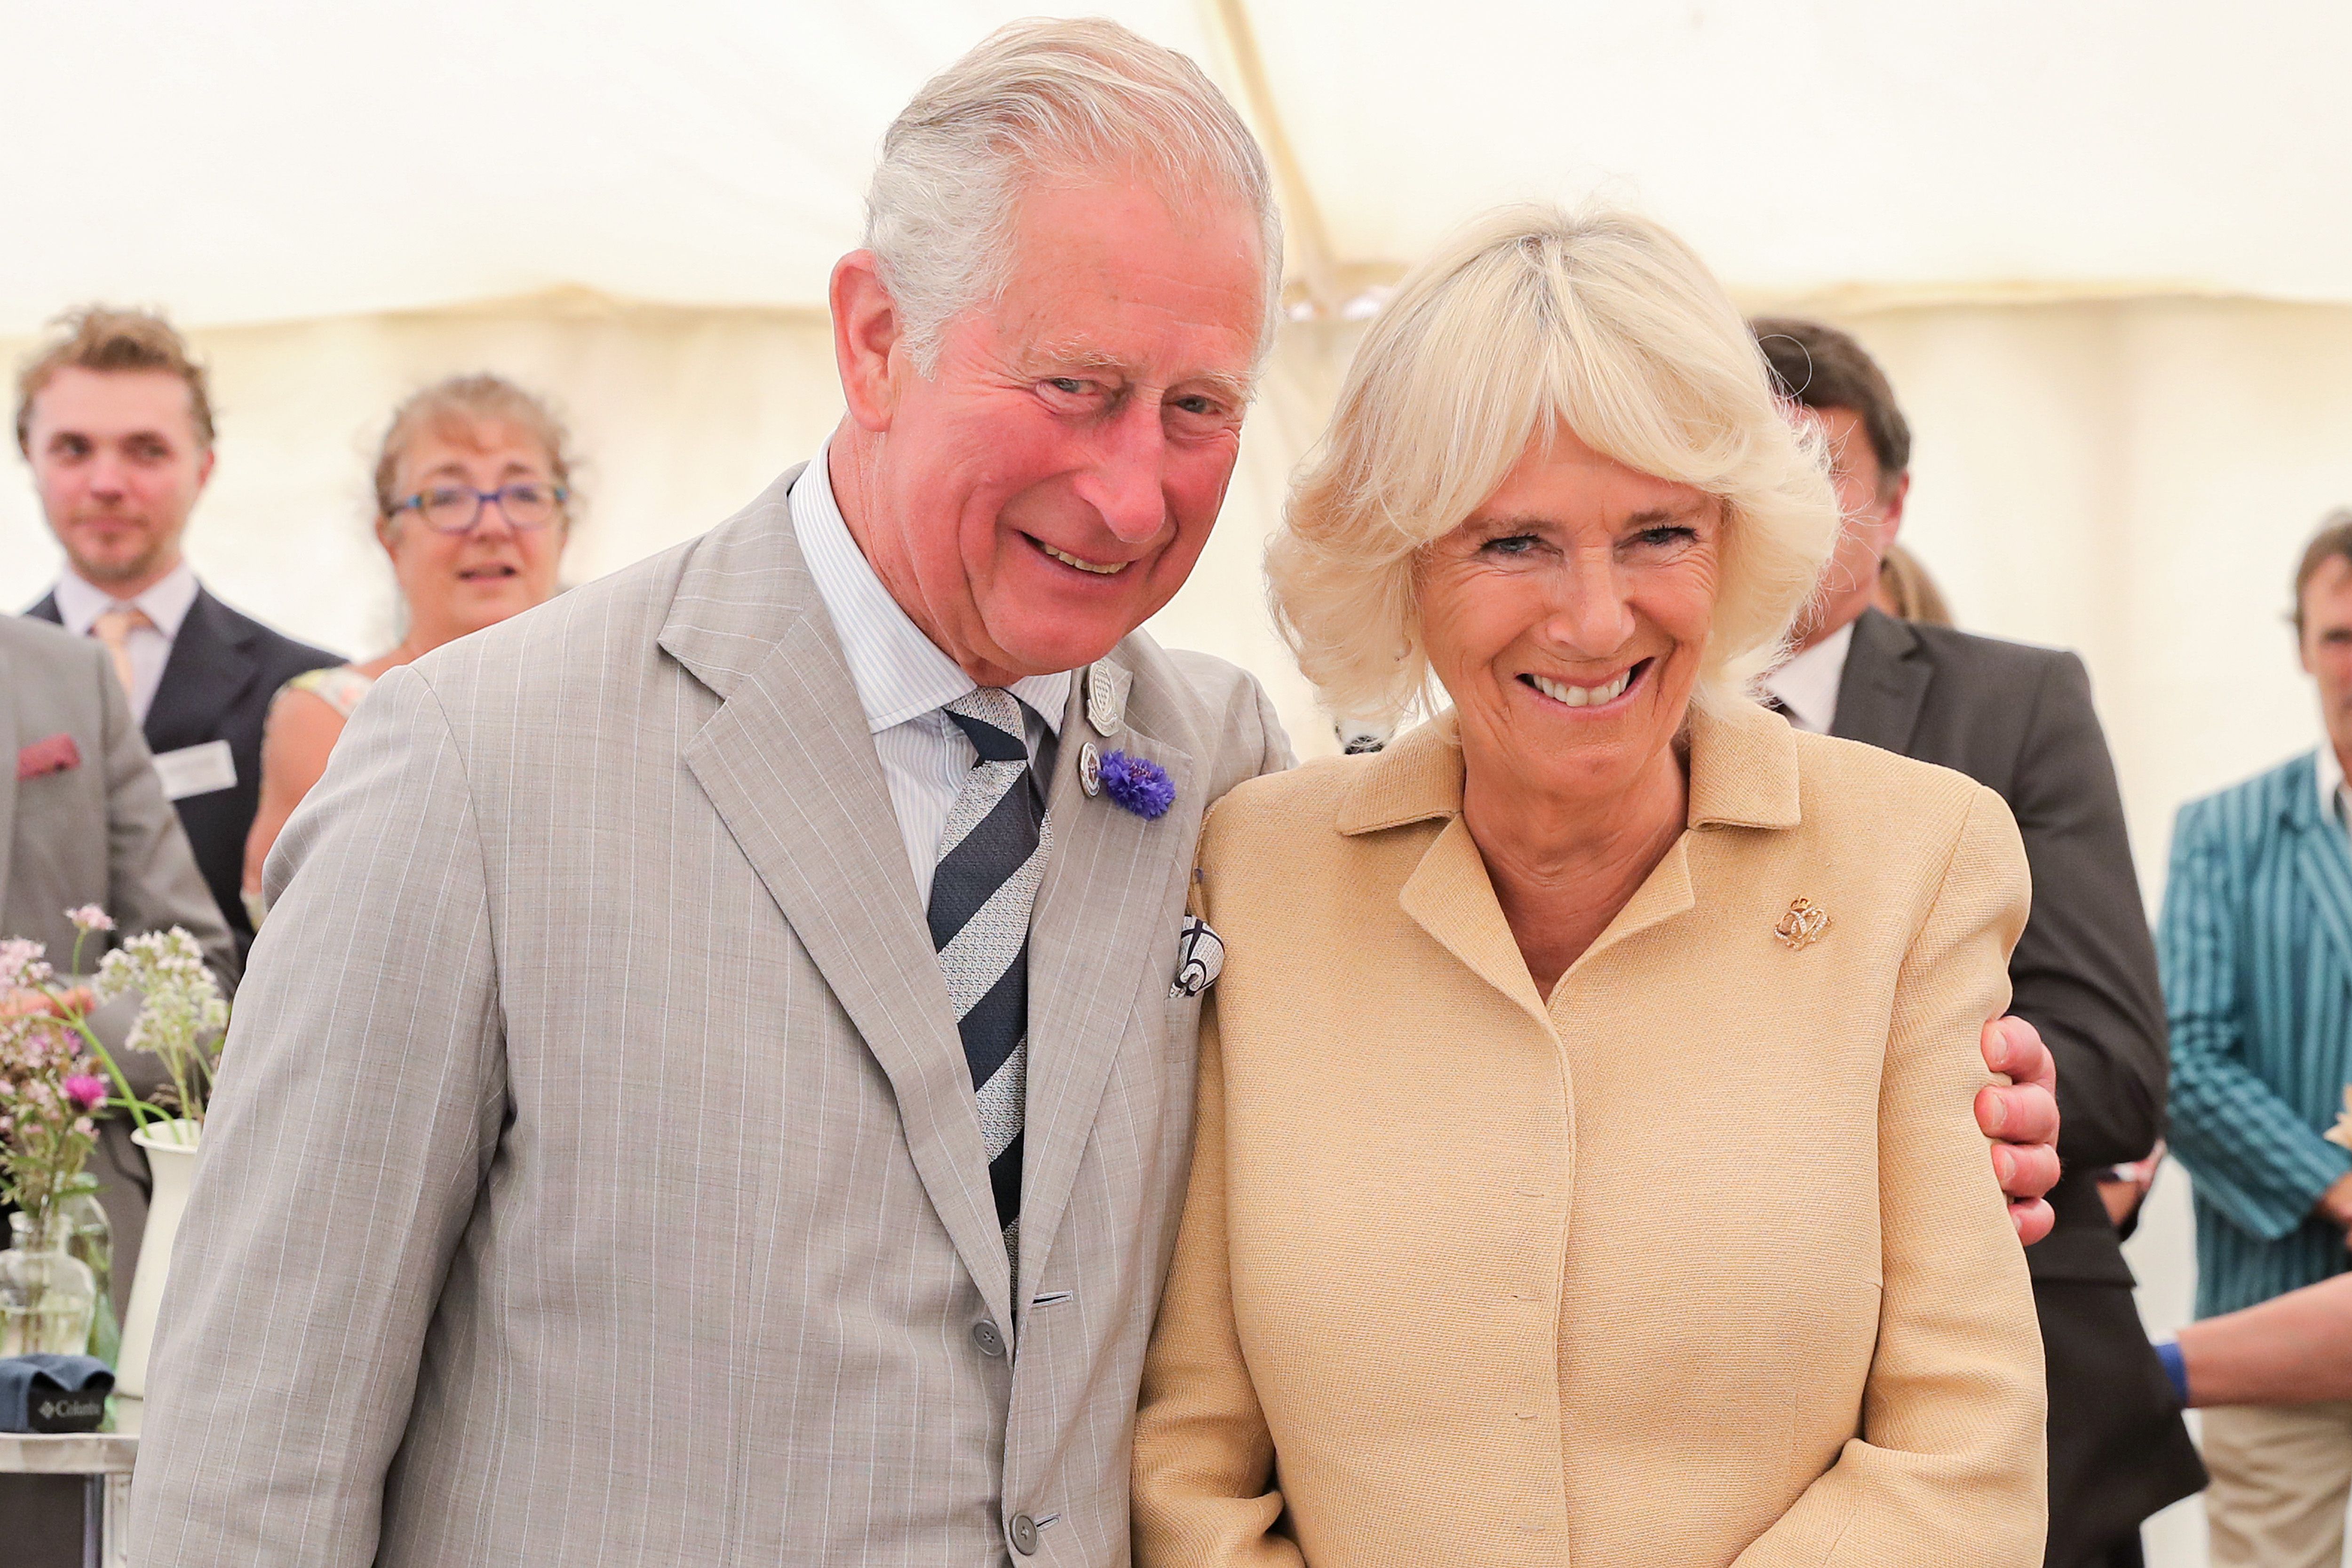 The Prince Of Wales & Duchess Of Cornwall Visit Devon & Cornwall on July 17, 2019 | Getty Images 